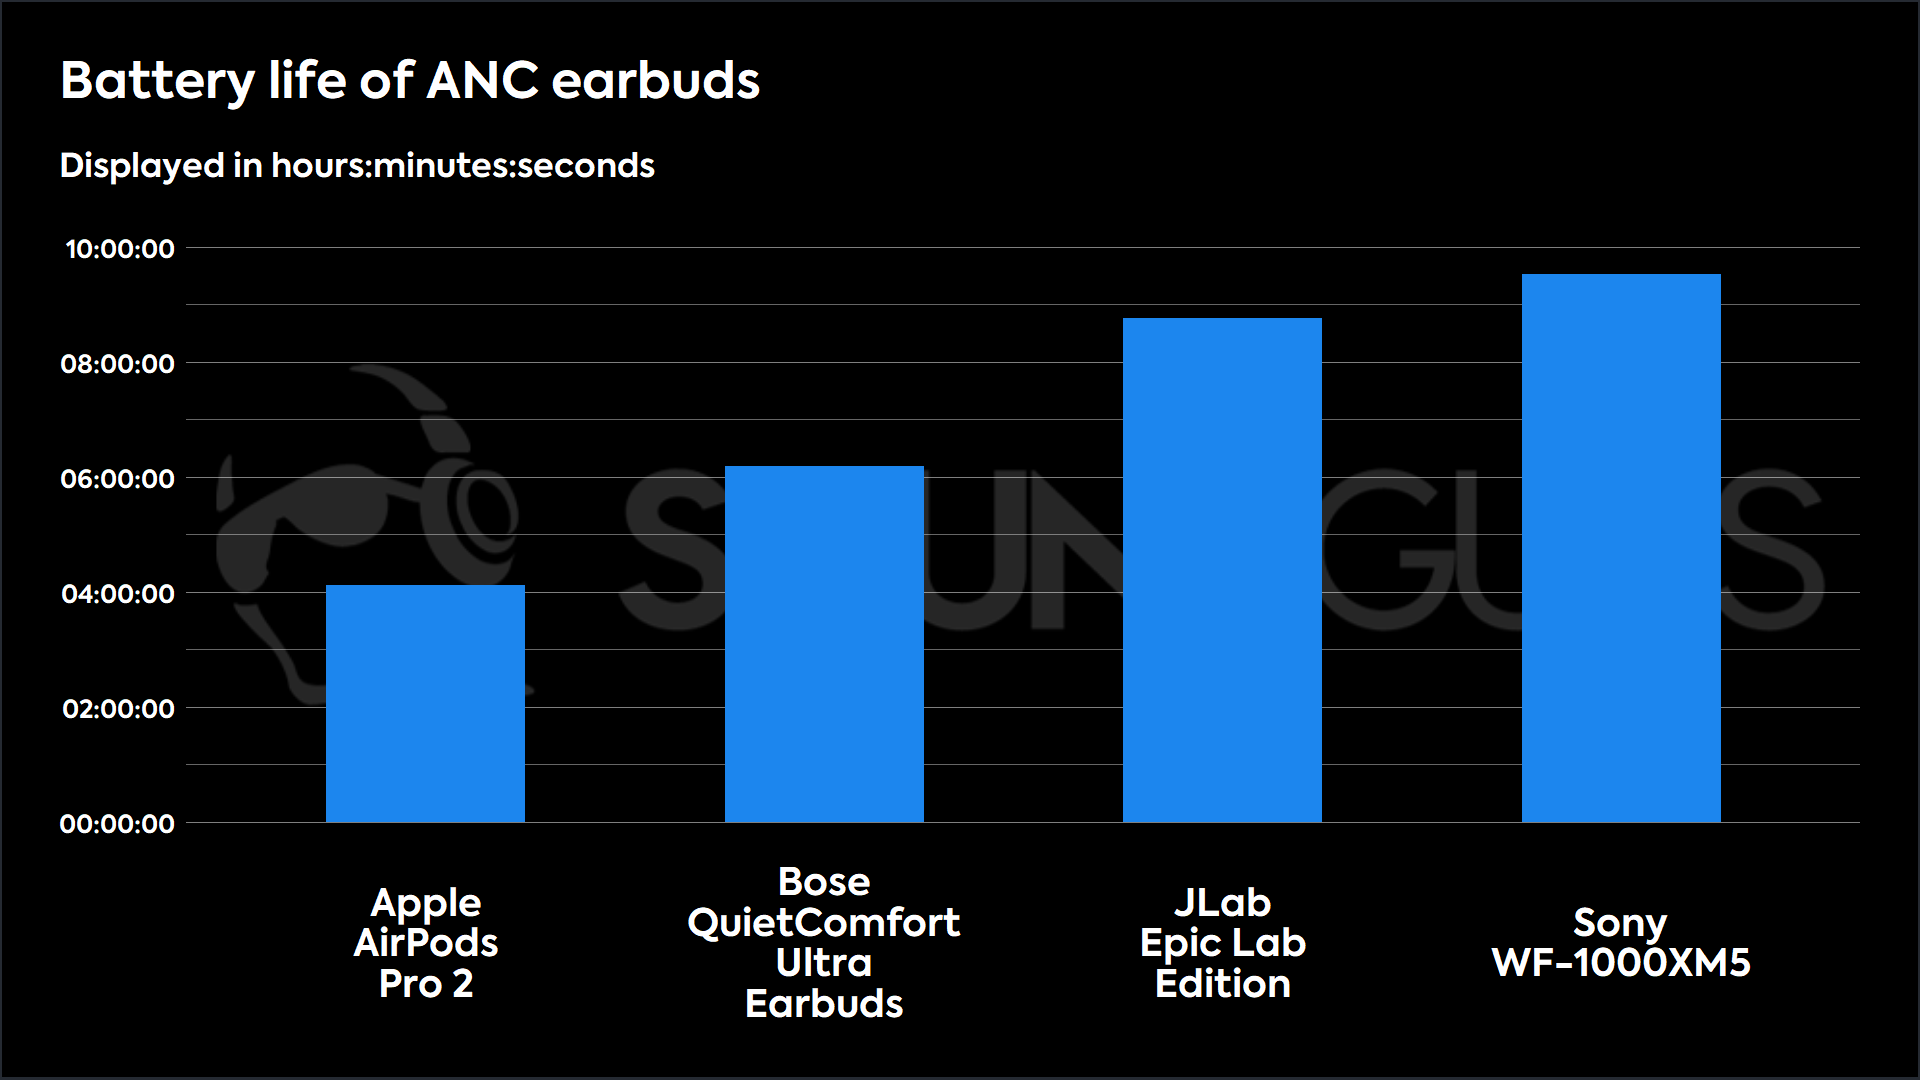 A bar plot comparing the battery life between the JLab Epic Lab Edition, Sony WF-1000XM5, Apple AirPods Pro 2, and the Bose QuietComfort Ultra Earbuds.